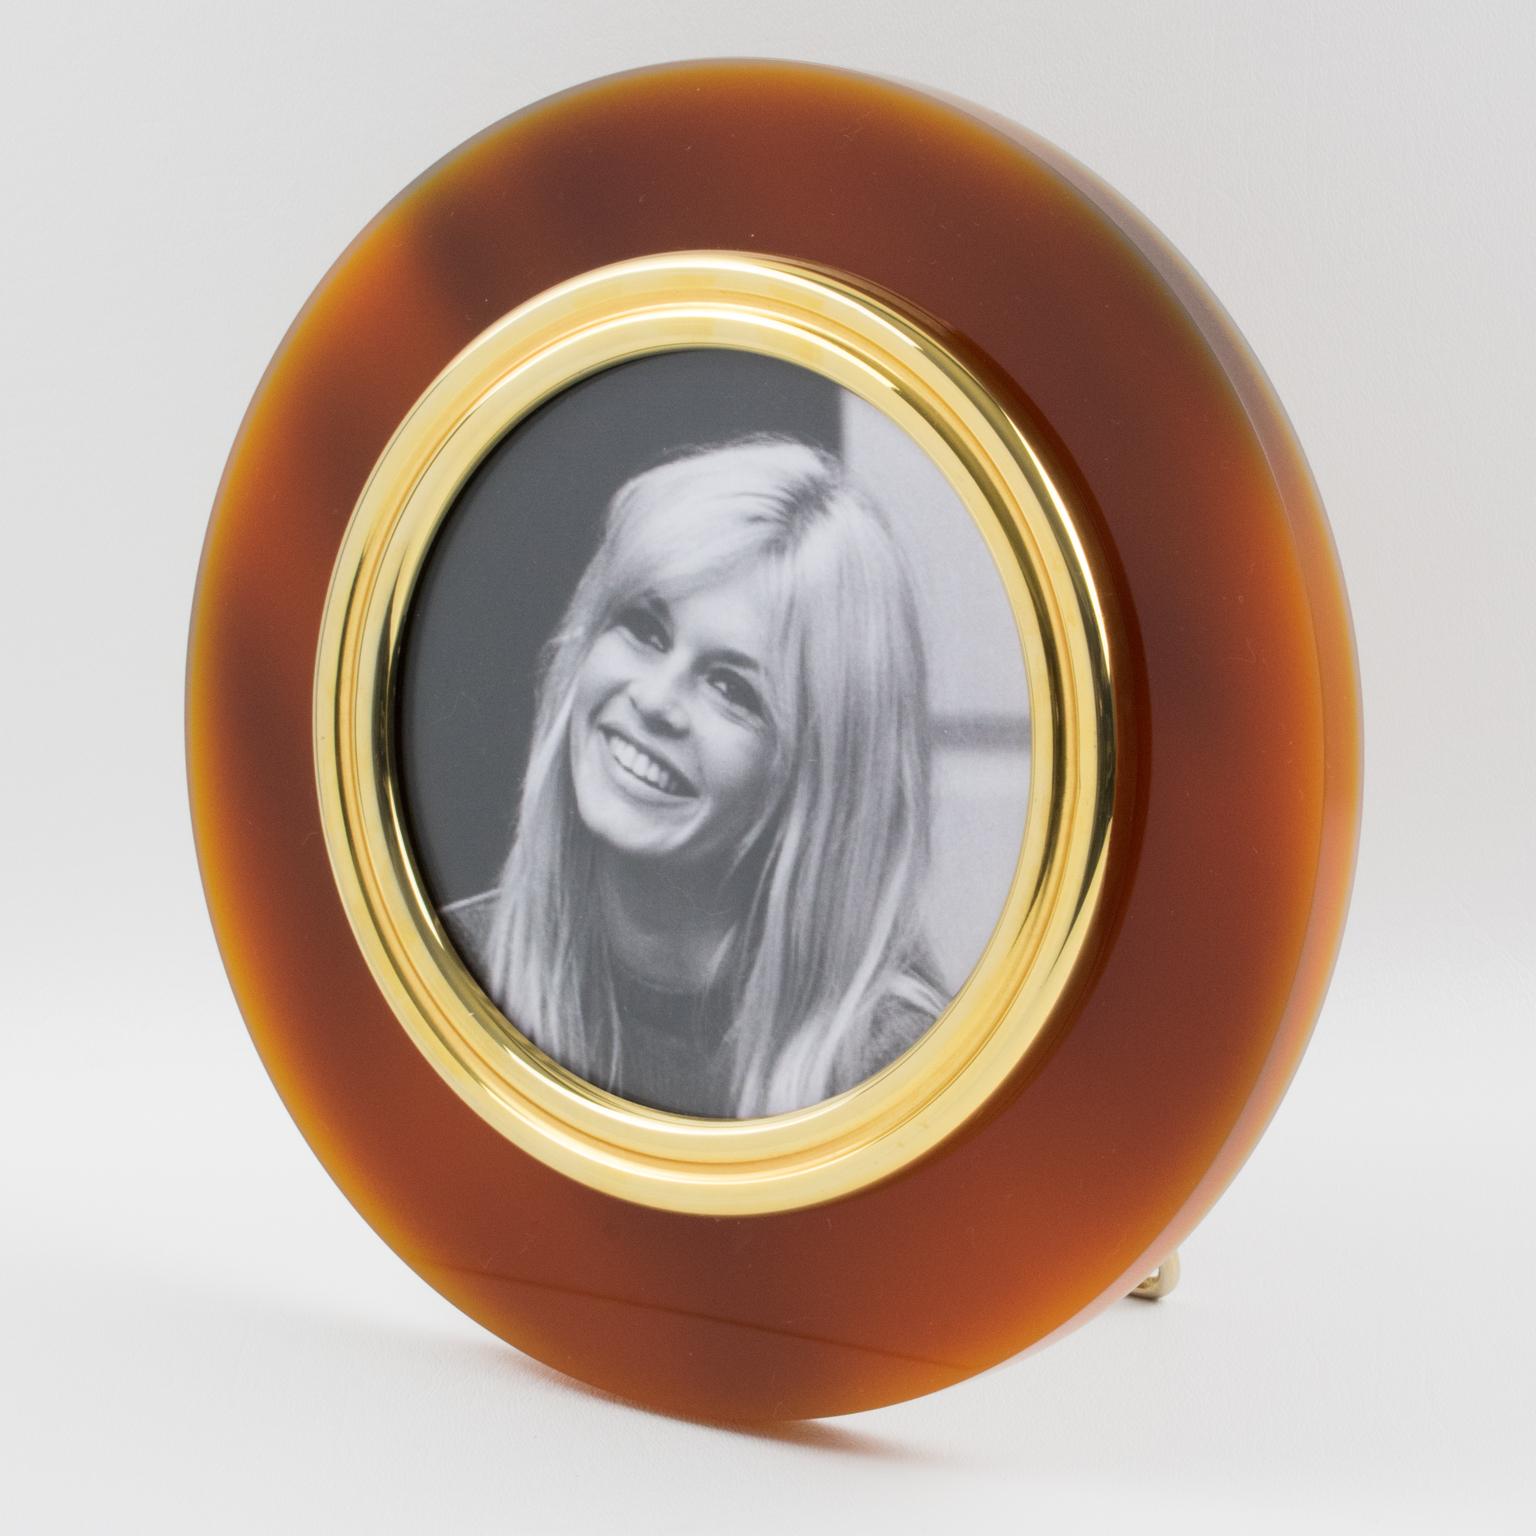 Stylish 1970s modernist round picture photo frame designed in the 1970s in Italy. Thick Lucite slab in red tea amber translucent color with gilt metal framing and easel. No visible maker's mark.
Measurements:
Overall: 9.07 in. diameter (23